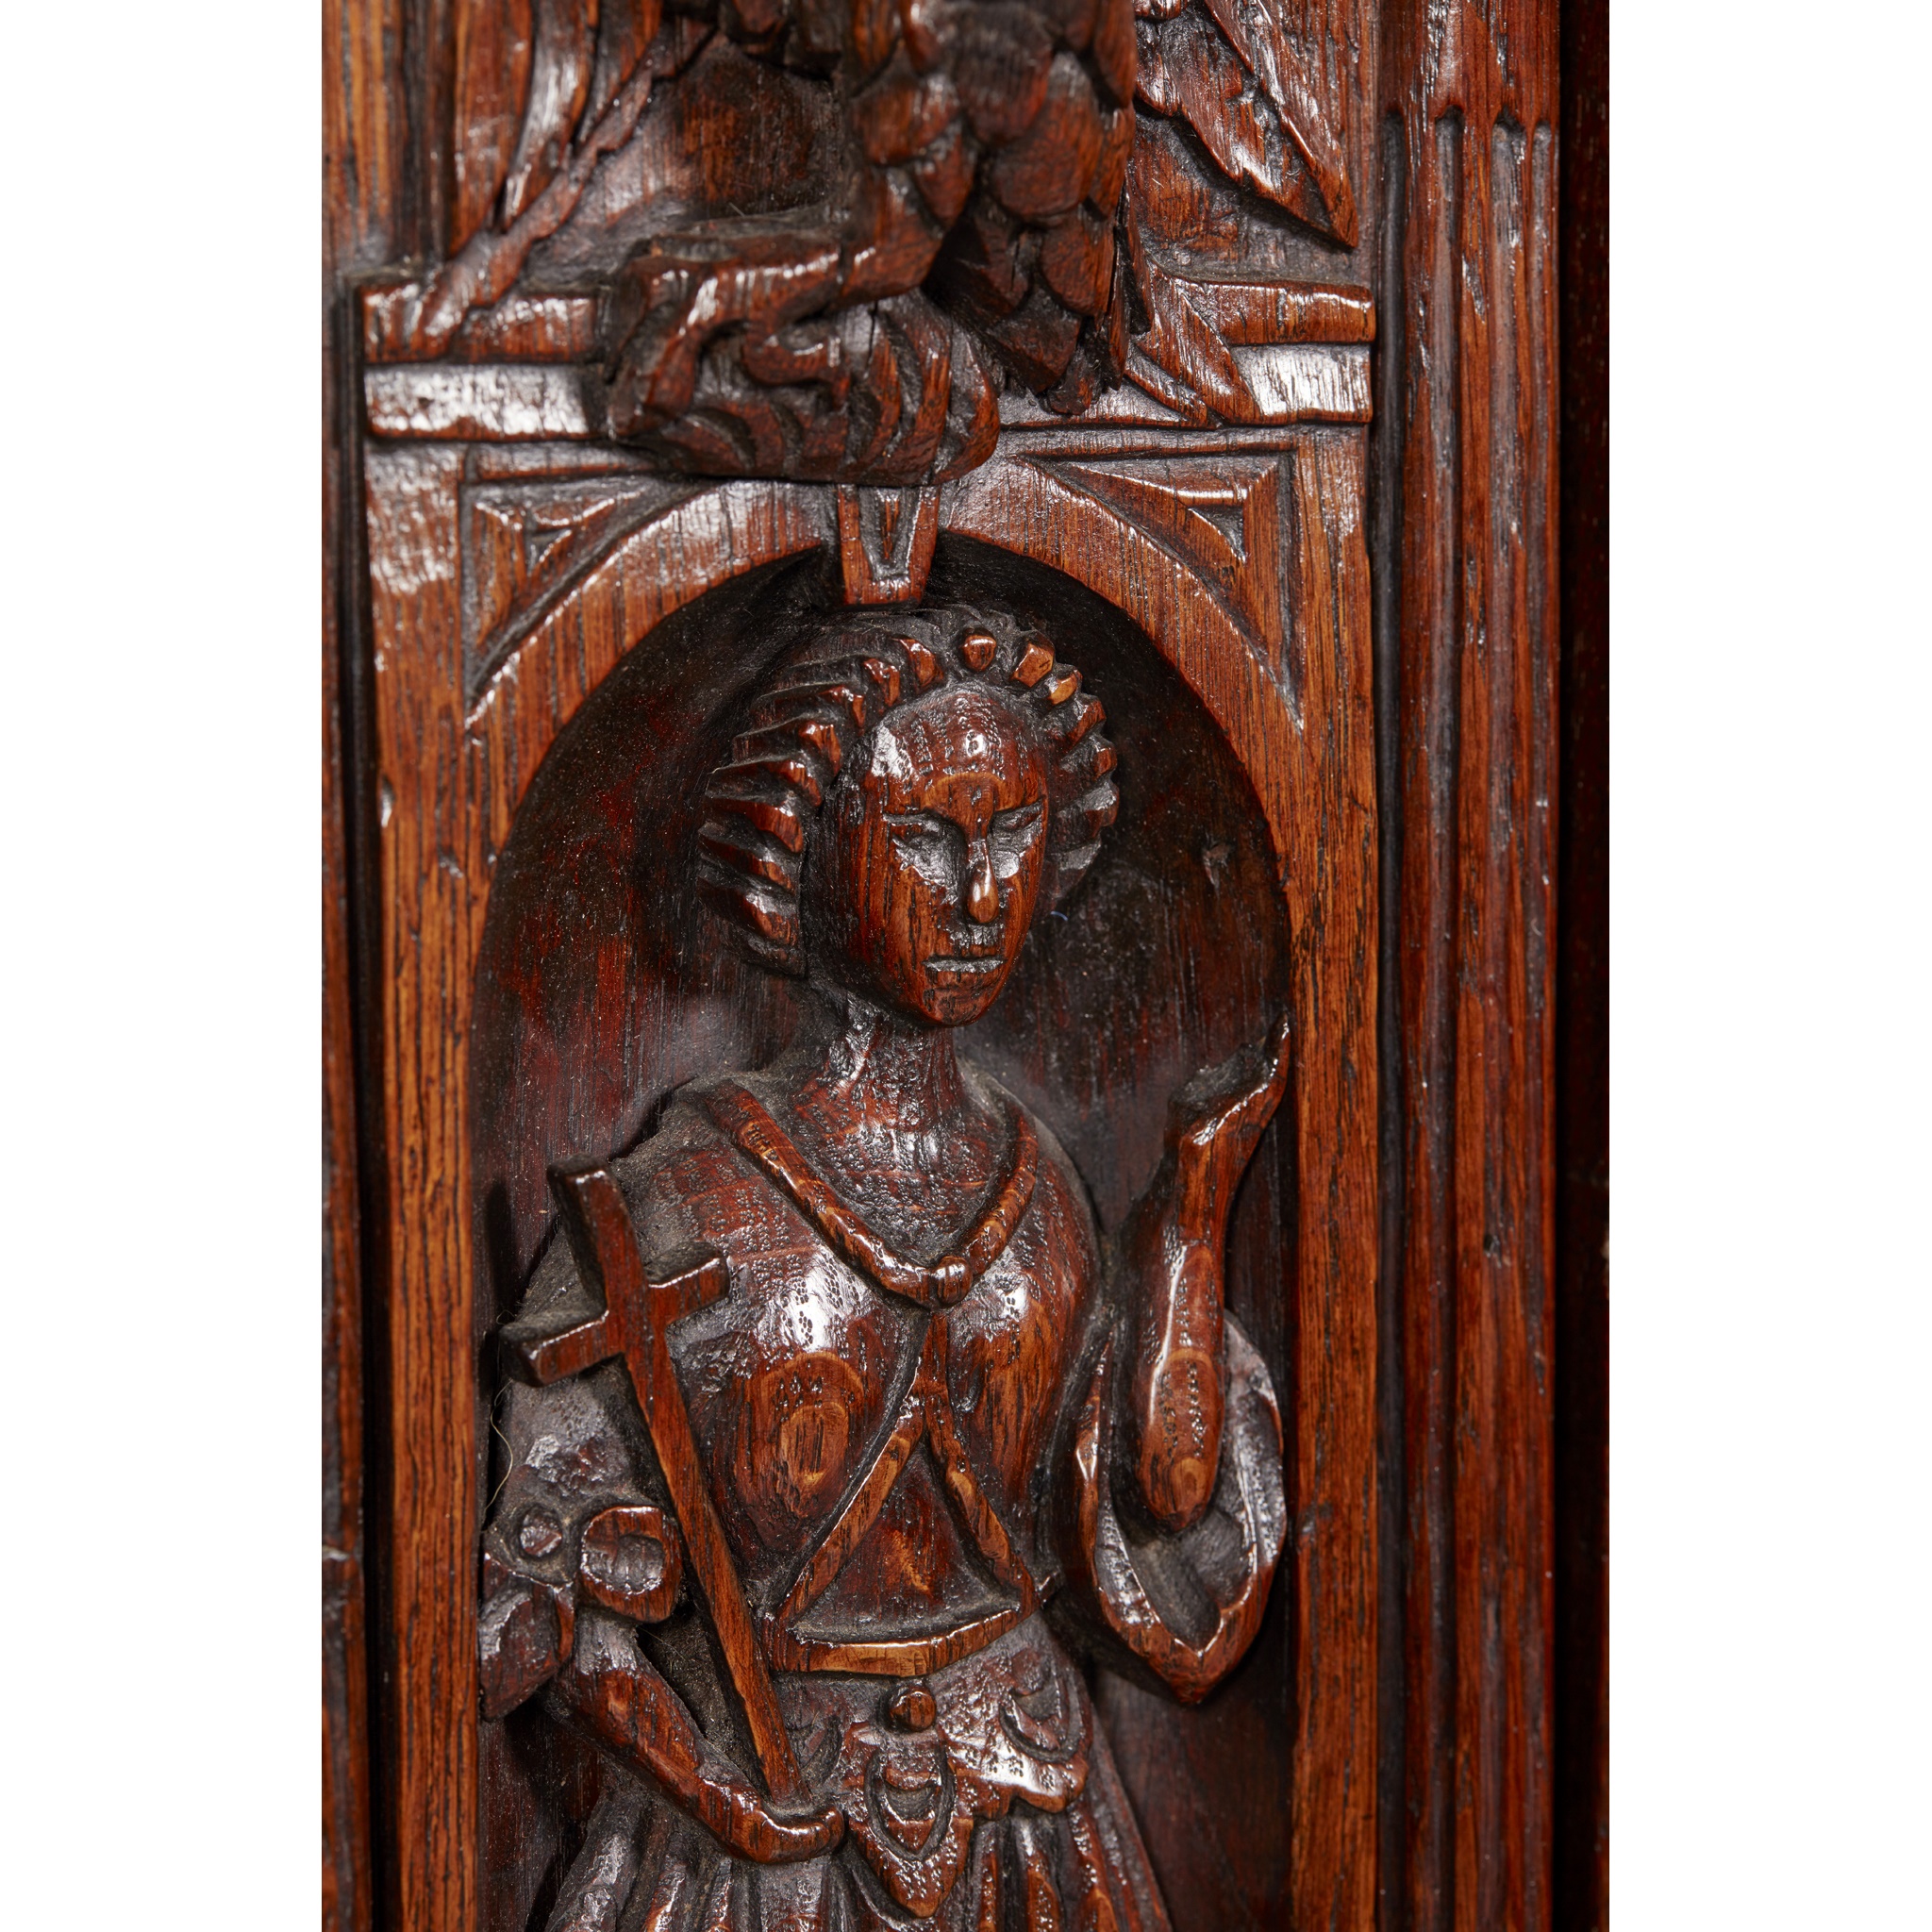 FRENCH RENAISSANCE OAK AND WALNUT DRESSOIR EARLY 17TH CENTURY - Image 3 of 3